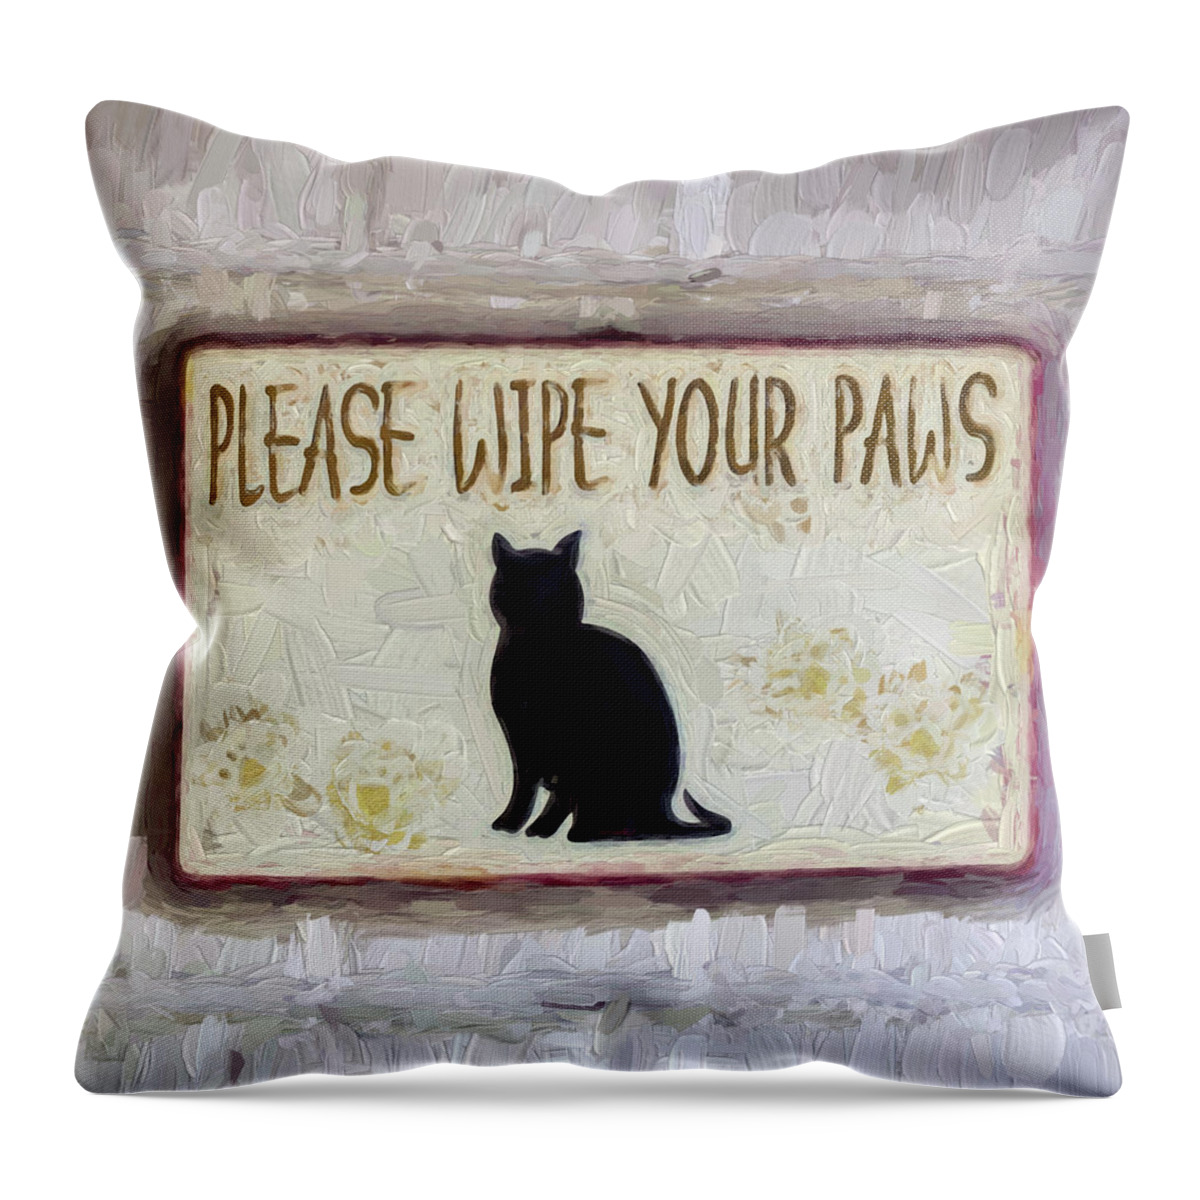 Sign Throw Pillow featuring the photograph Church Camp House Detail Painterly Series 7 by Carol Leigh